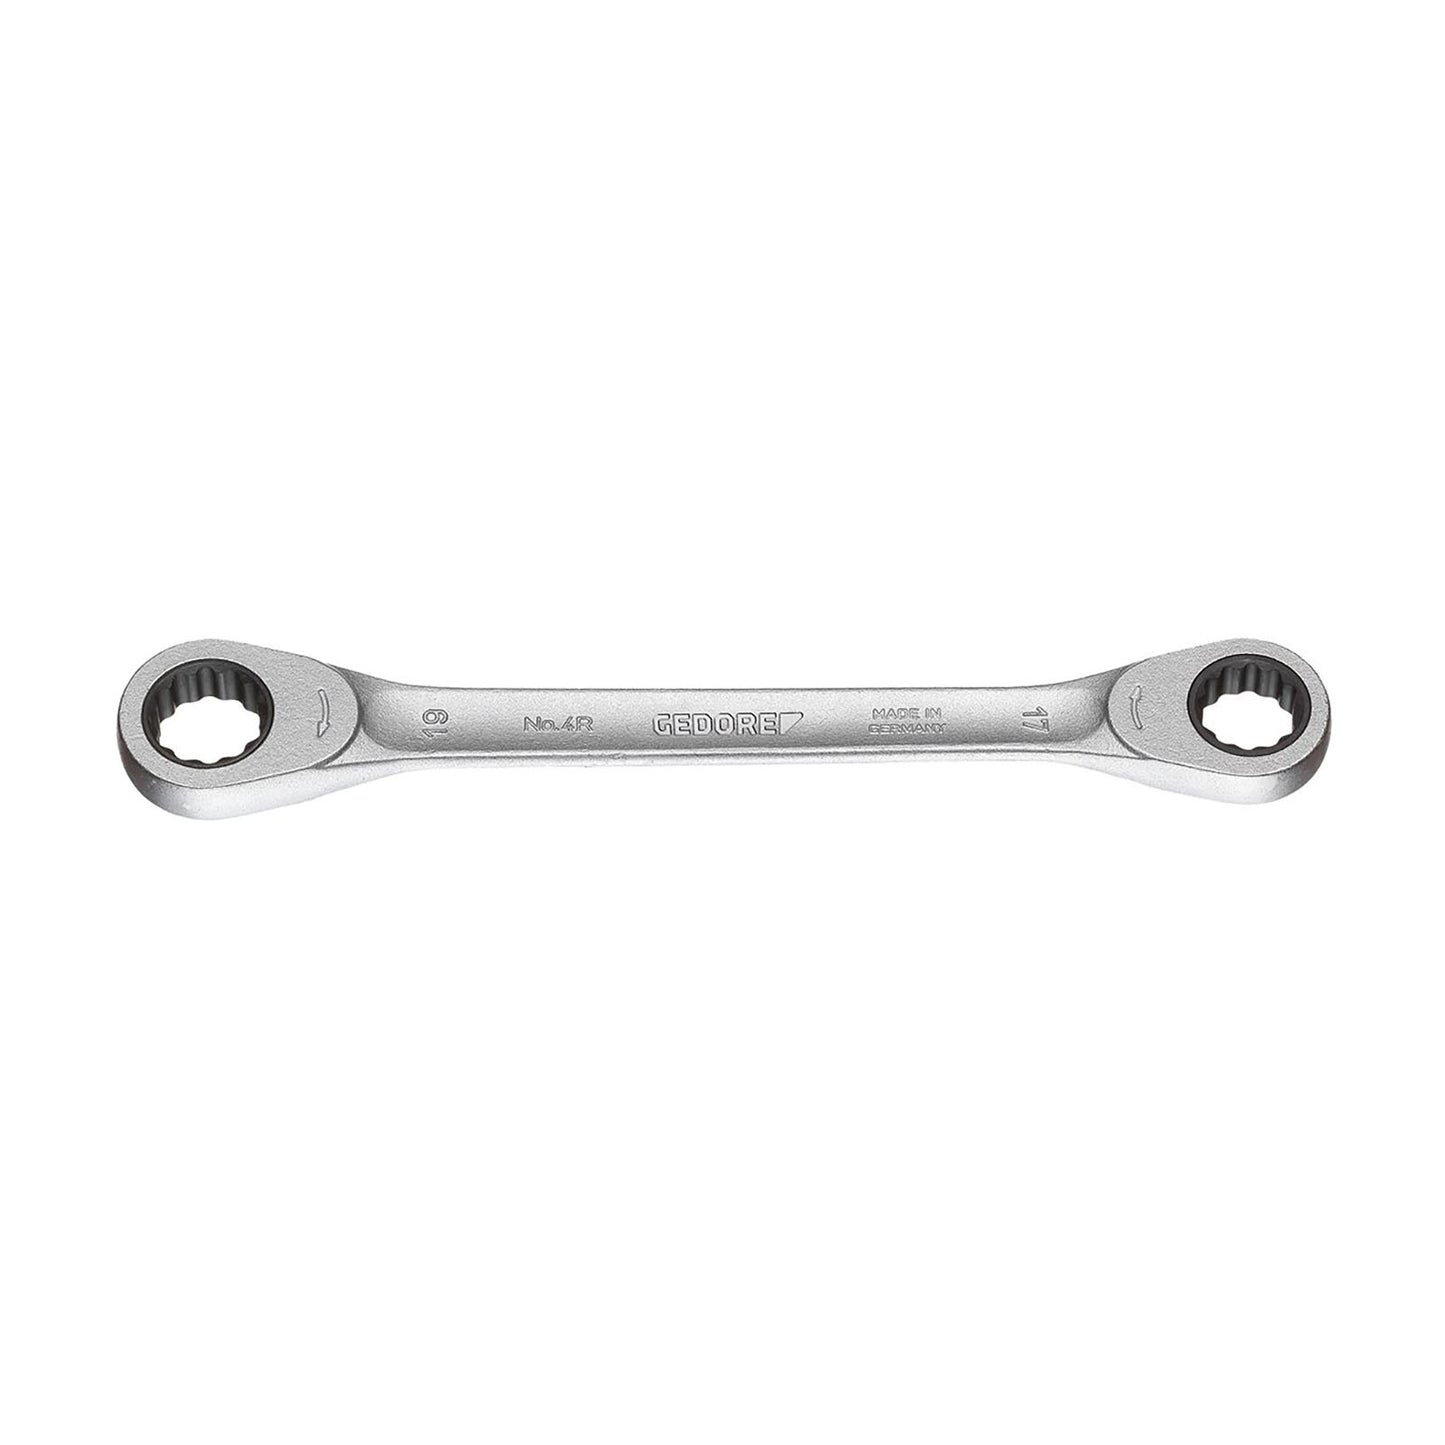 GEDORE 4 R 18X19 - Flat ratchet wrench, 18x19 (2306832)